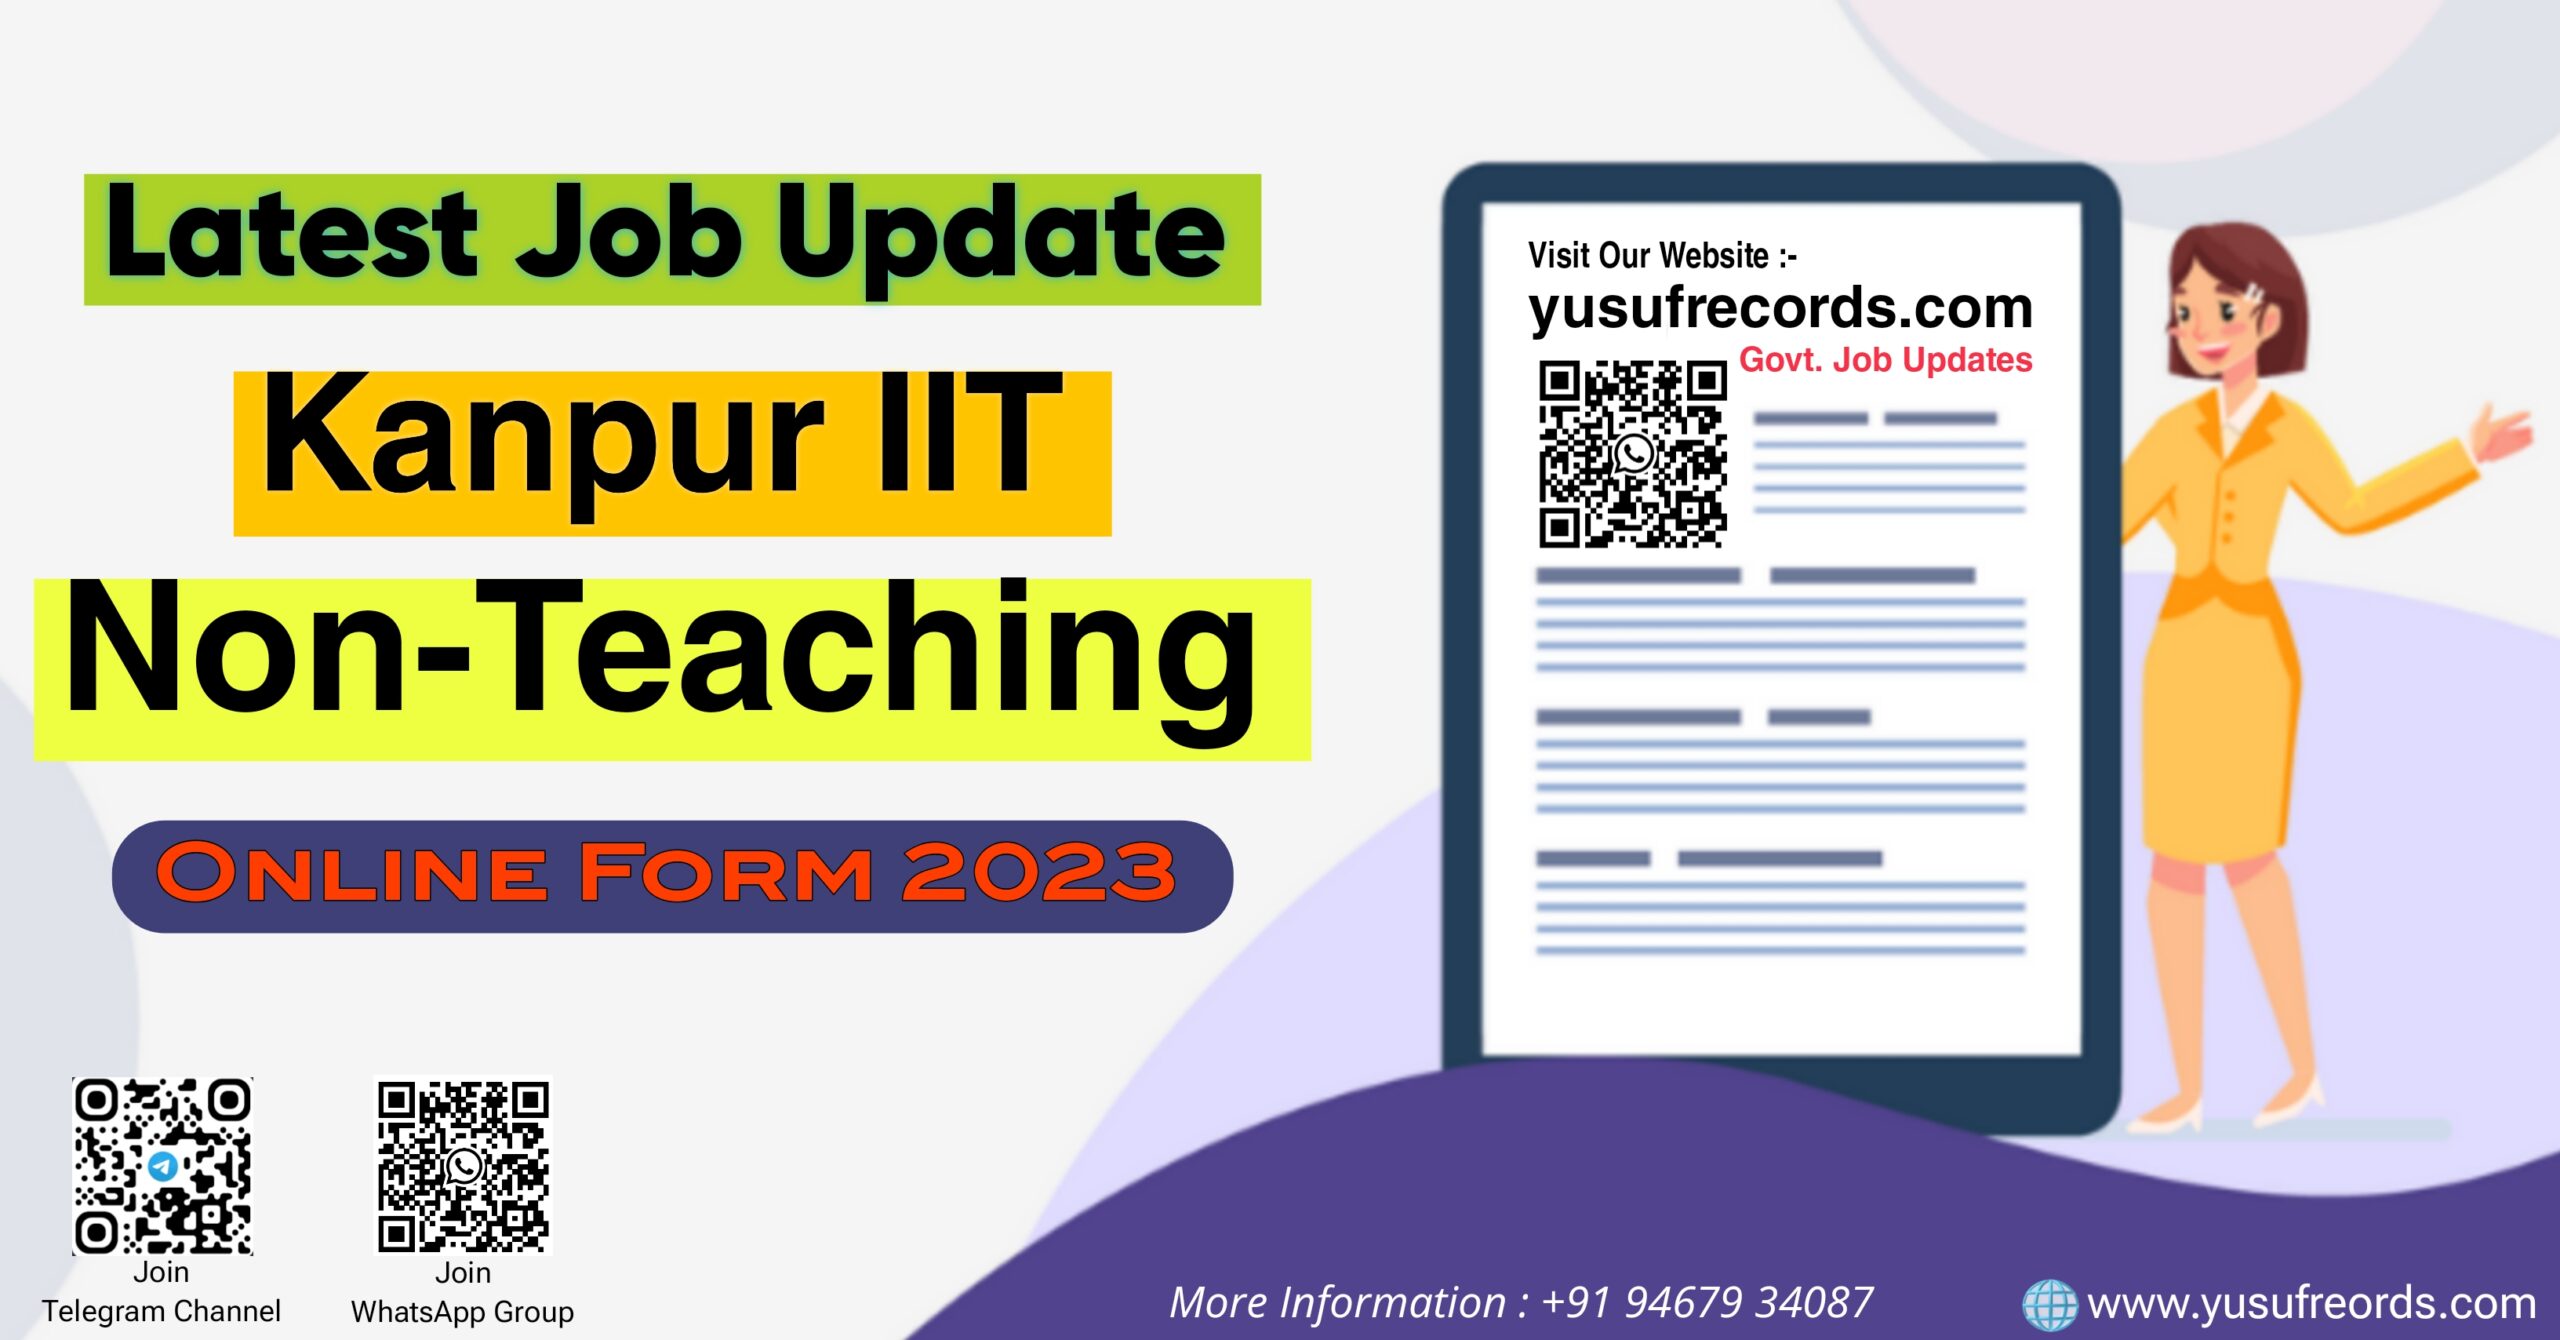 Kanpur IIT Non-Teaching Posts Online Form yusufrecords.com